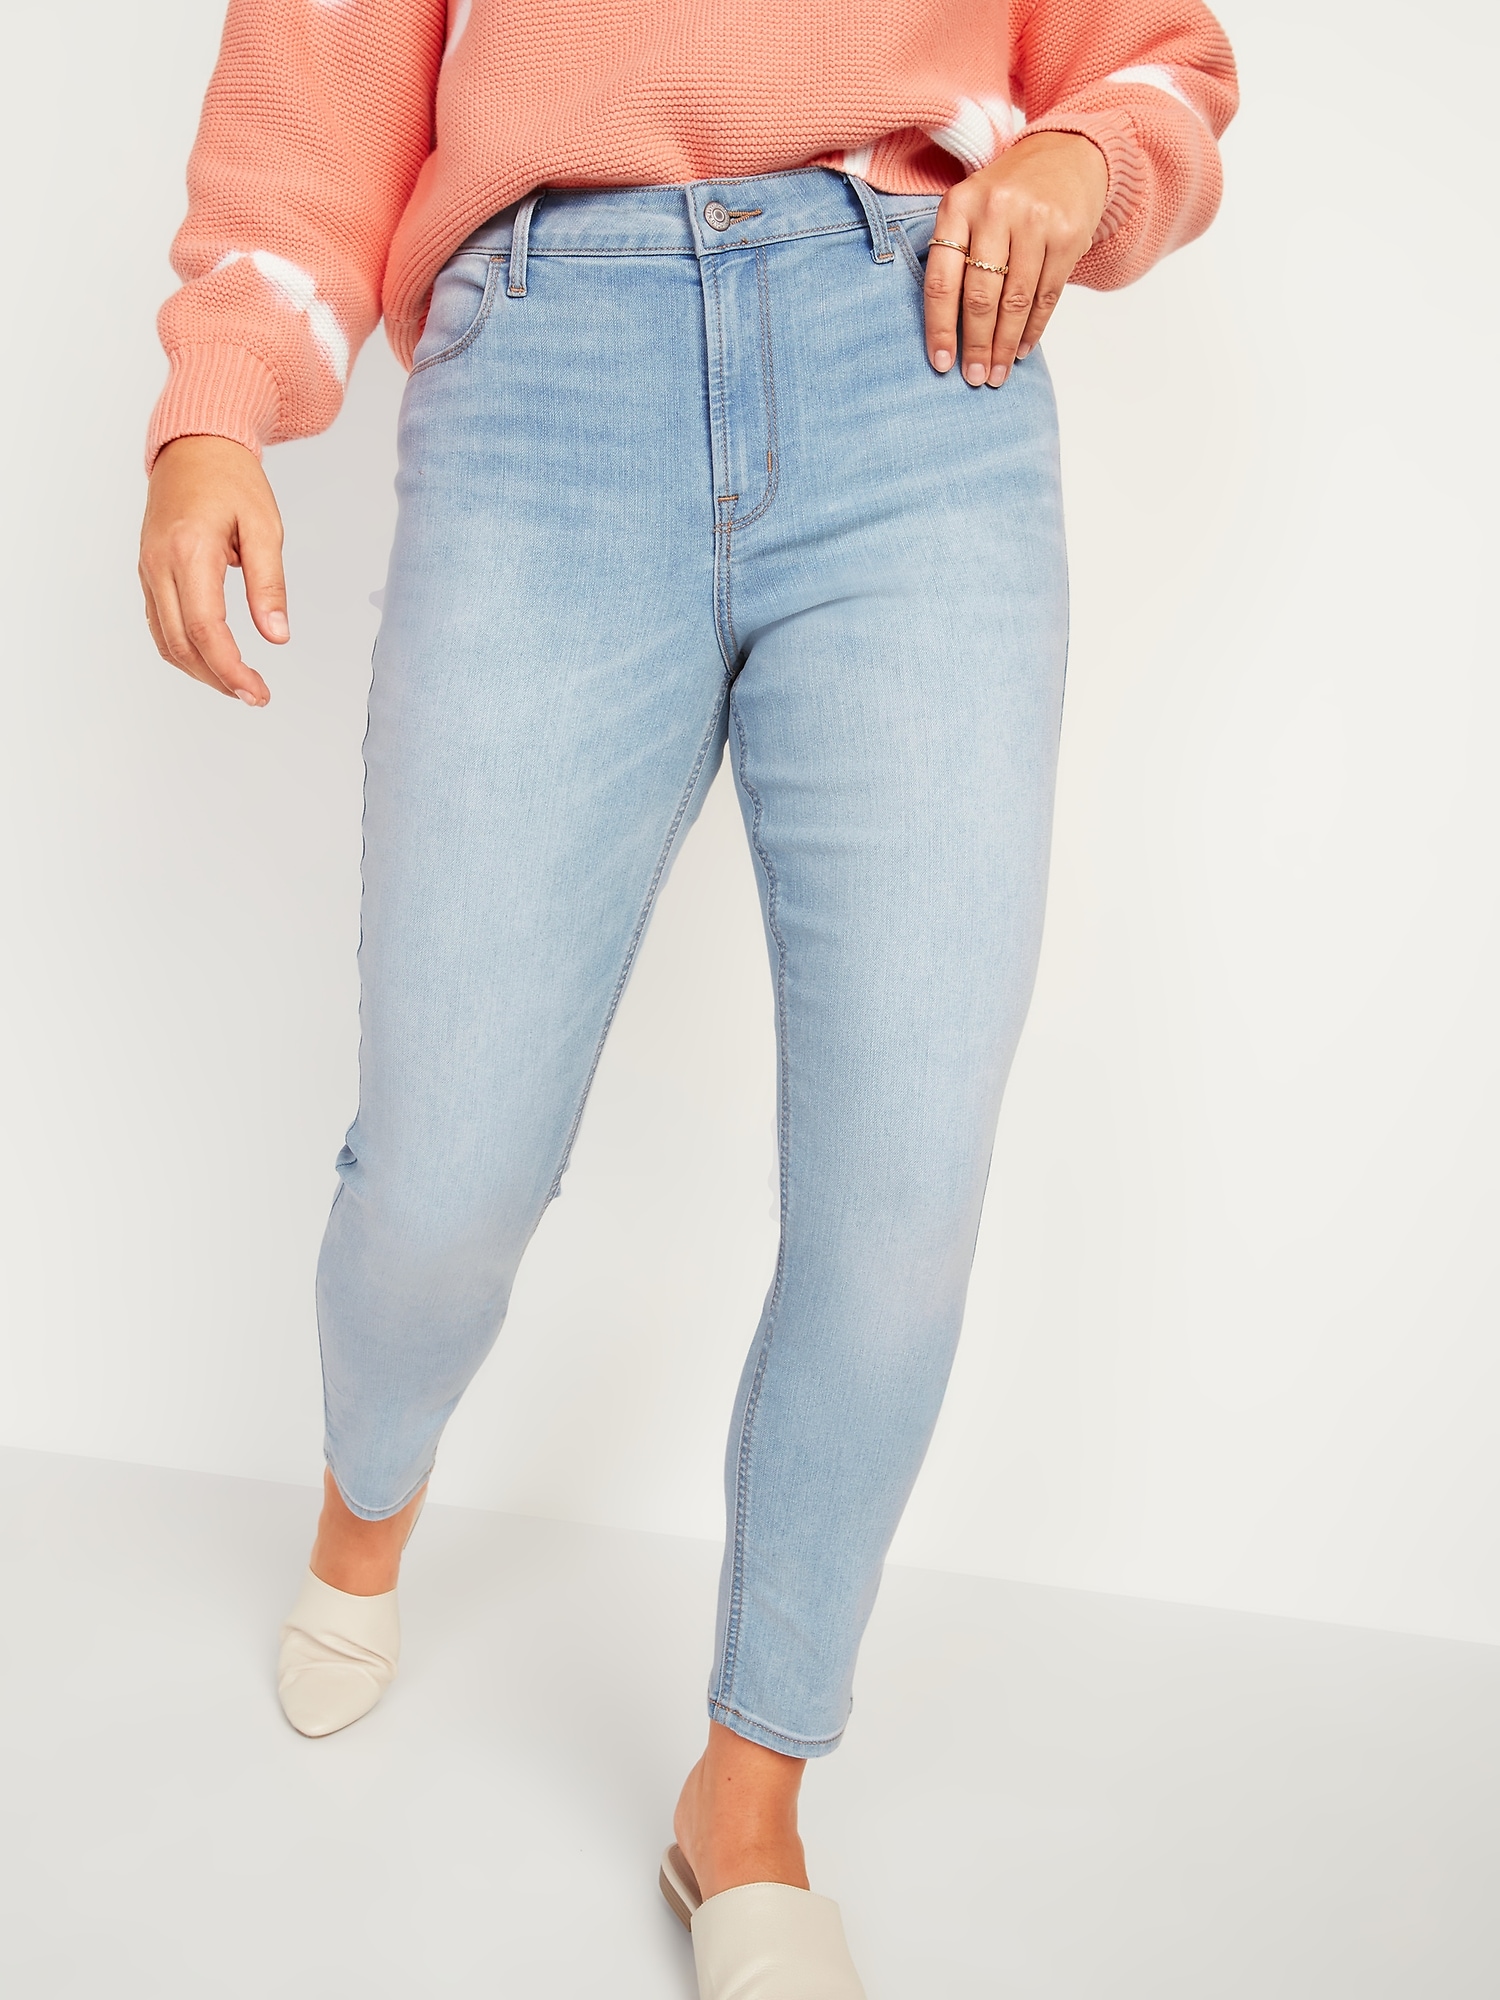 High-Waisted Light-Wash Super Skinny Ankle Jeans for Women